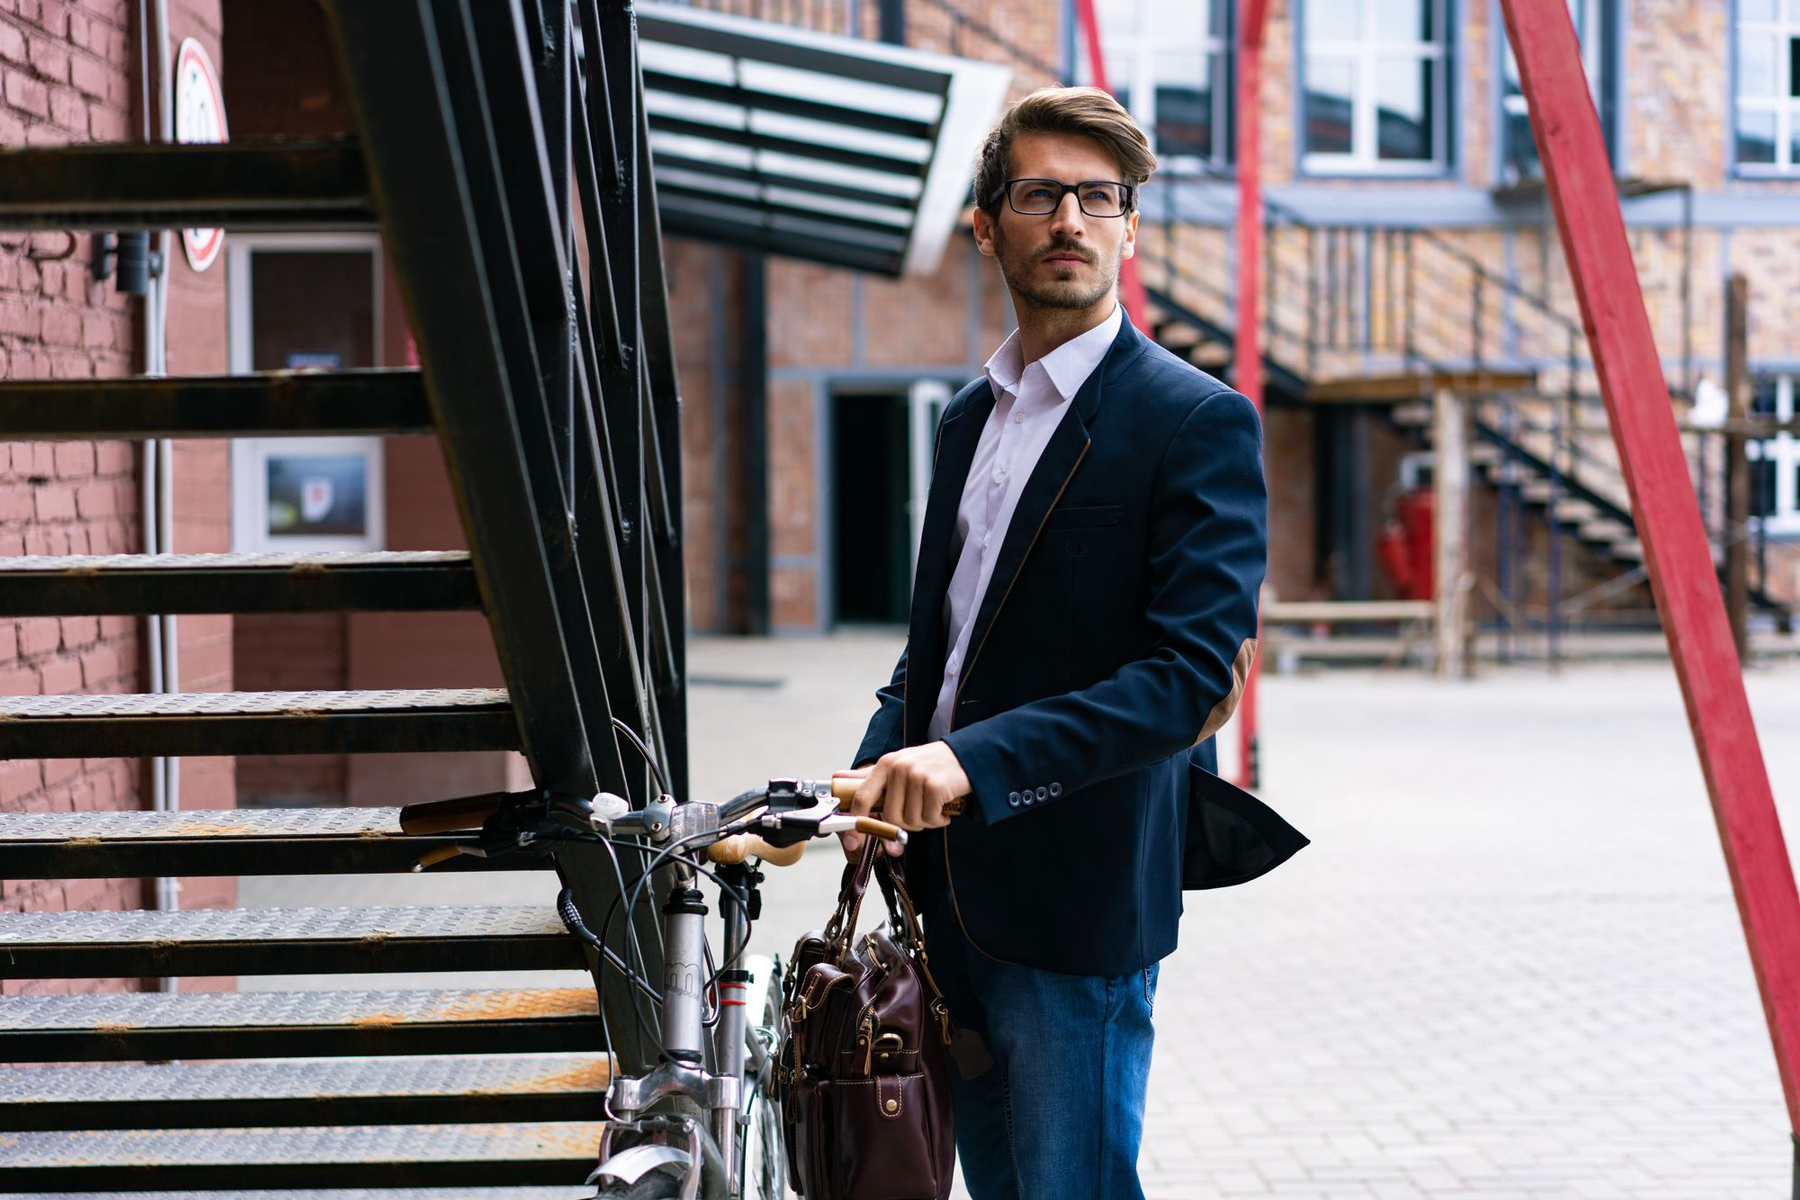 Man in suit with bicycle